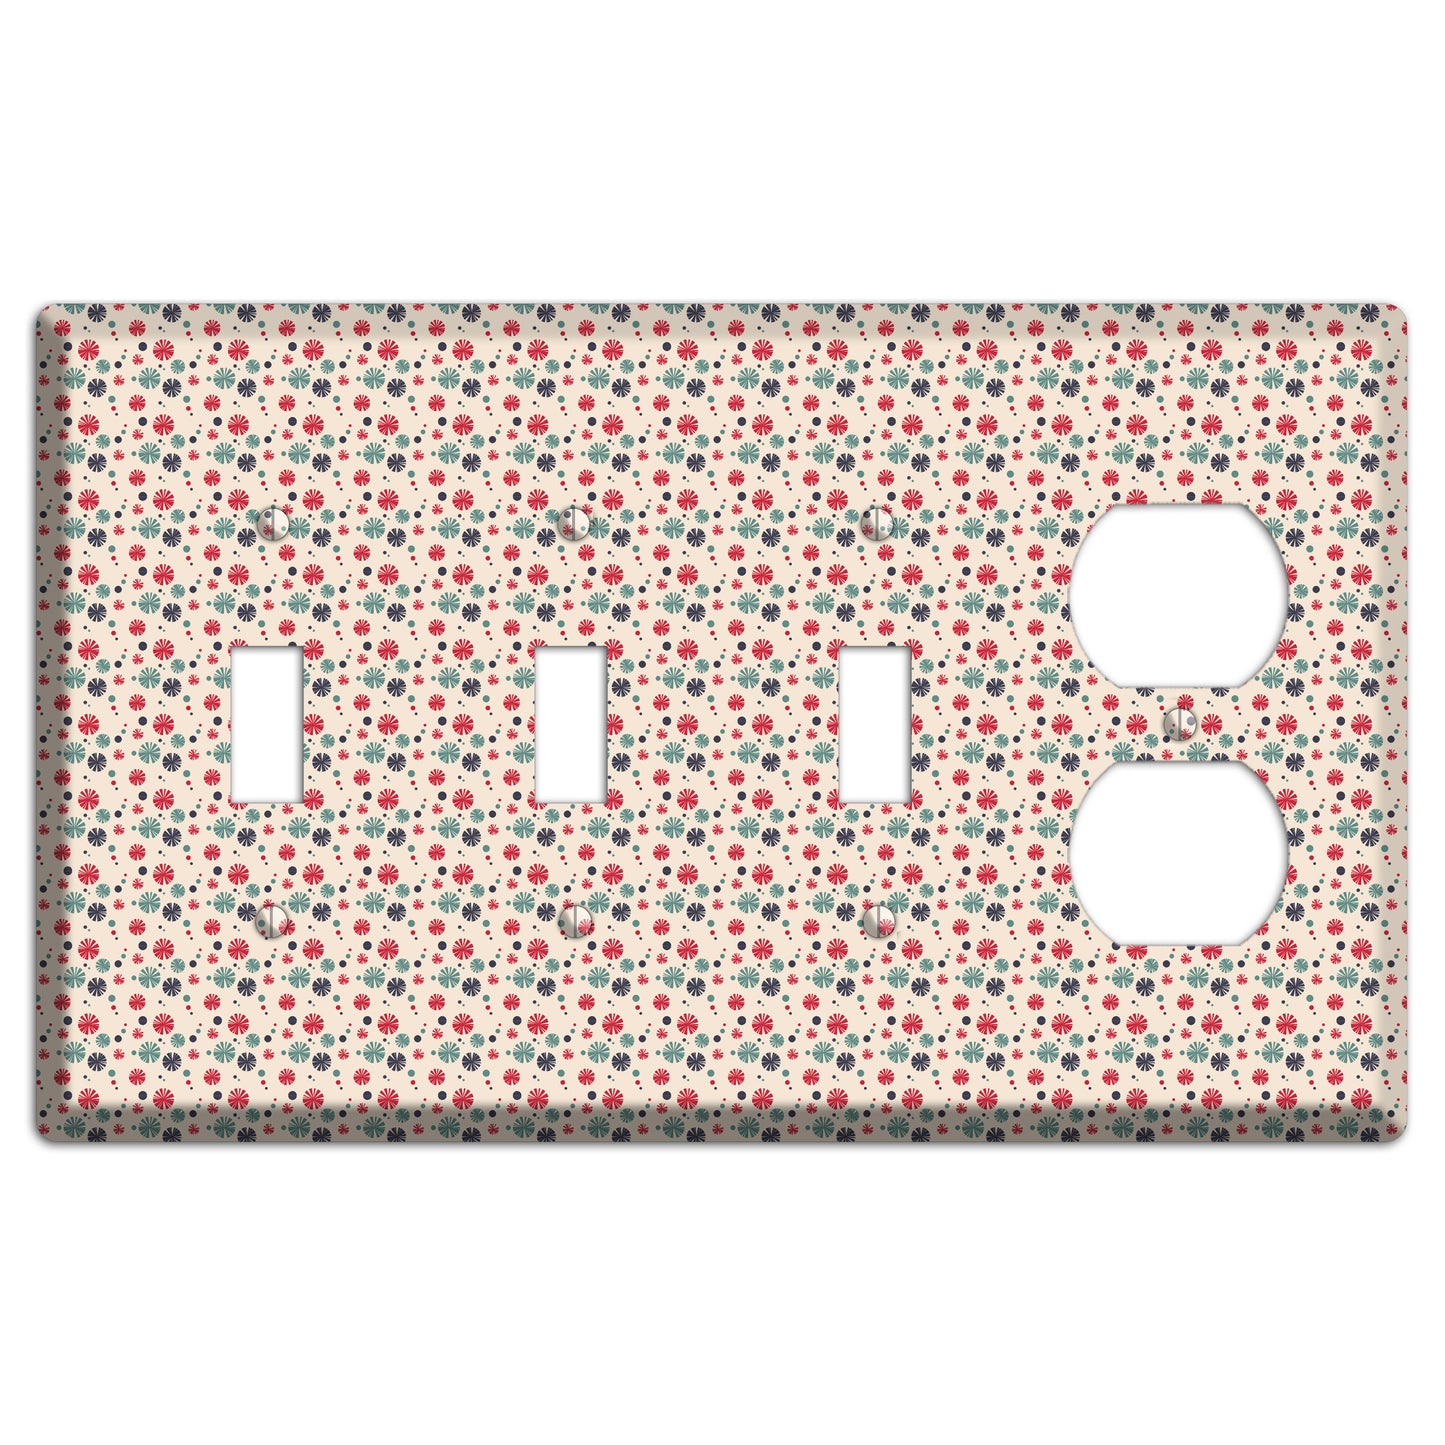 Off White with Red Green Blue Retro Bursts 3 Toggle / Duplex Wallplate